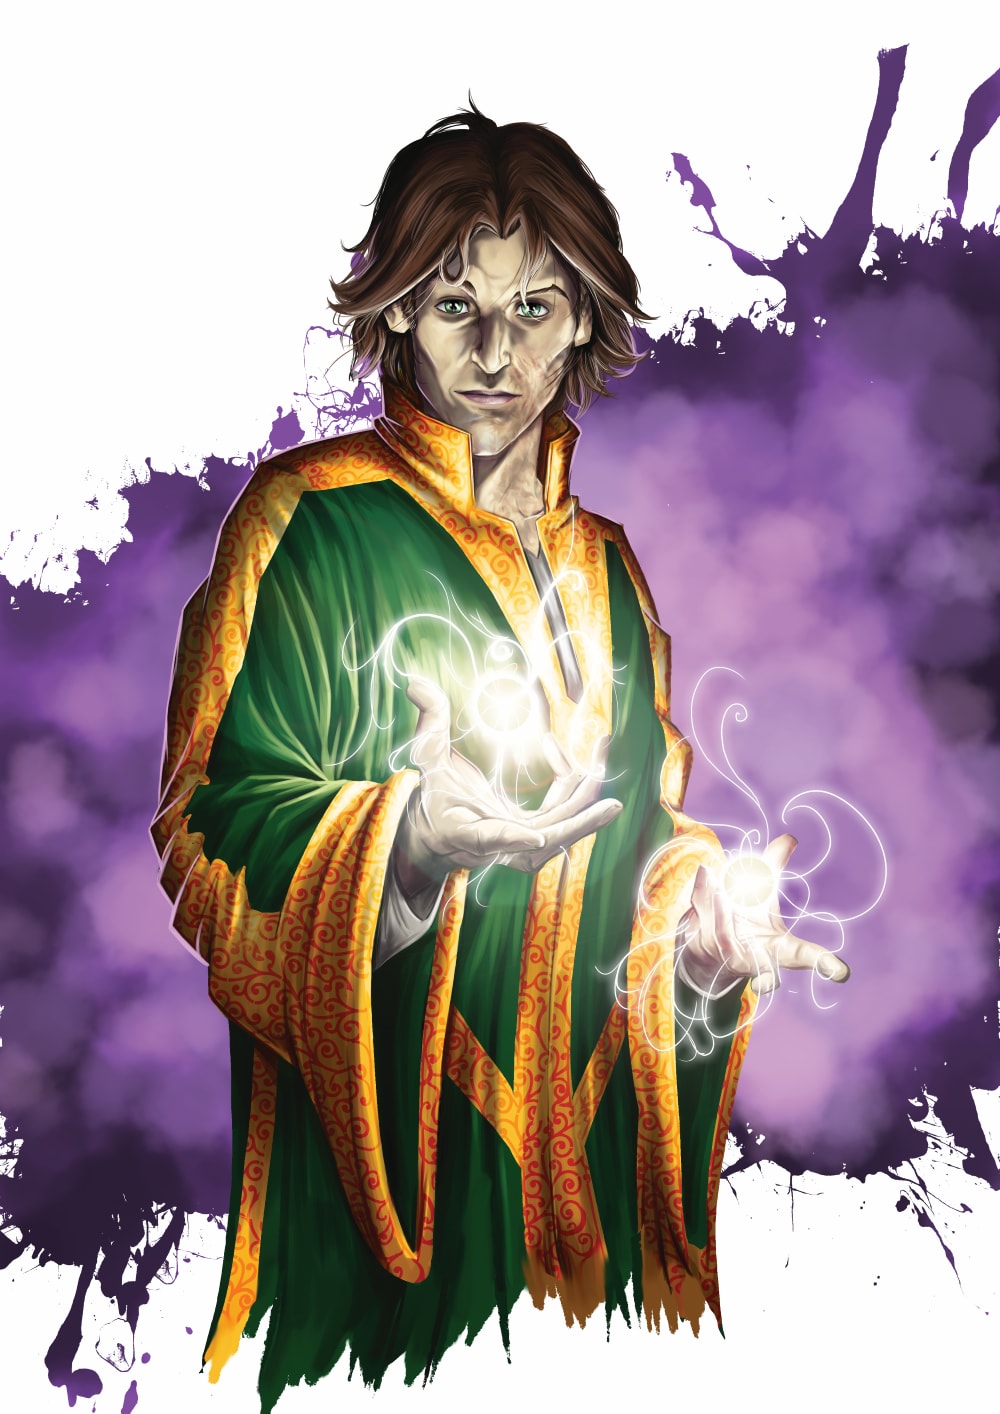 Character art of Haelius Akana, the disaster wizard of THE OUTCAST MAGE. He is a thin man with pronounced cheekbones, pale brown skin, green eyes and tousled brown hair that looks like it hasn't seen a hairbrush in some time. He is wearing green mage robes edged in gold and red. In his hands are glowing tendrils of magic. There is a purple splash background. Overall, he has an intense but also doesn't know how to look after himself vibe.